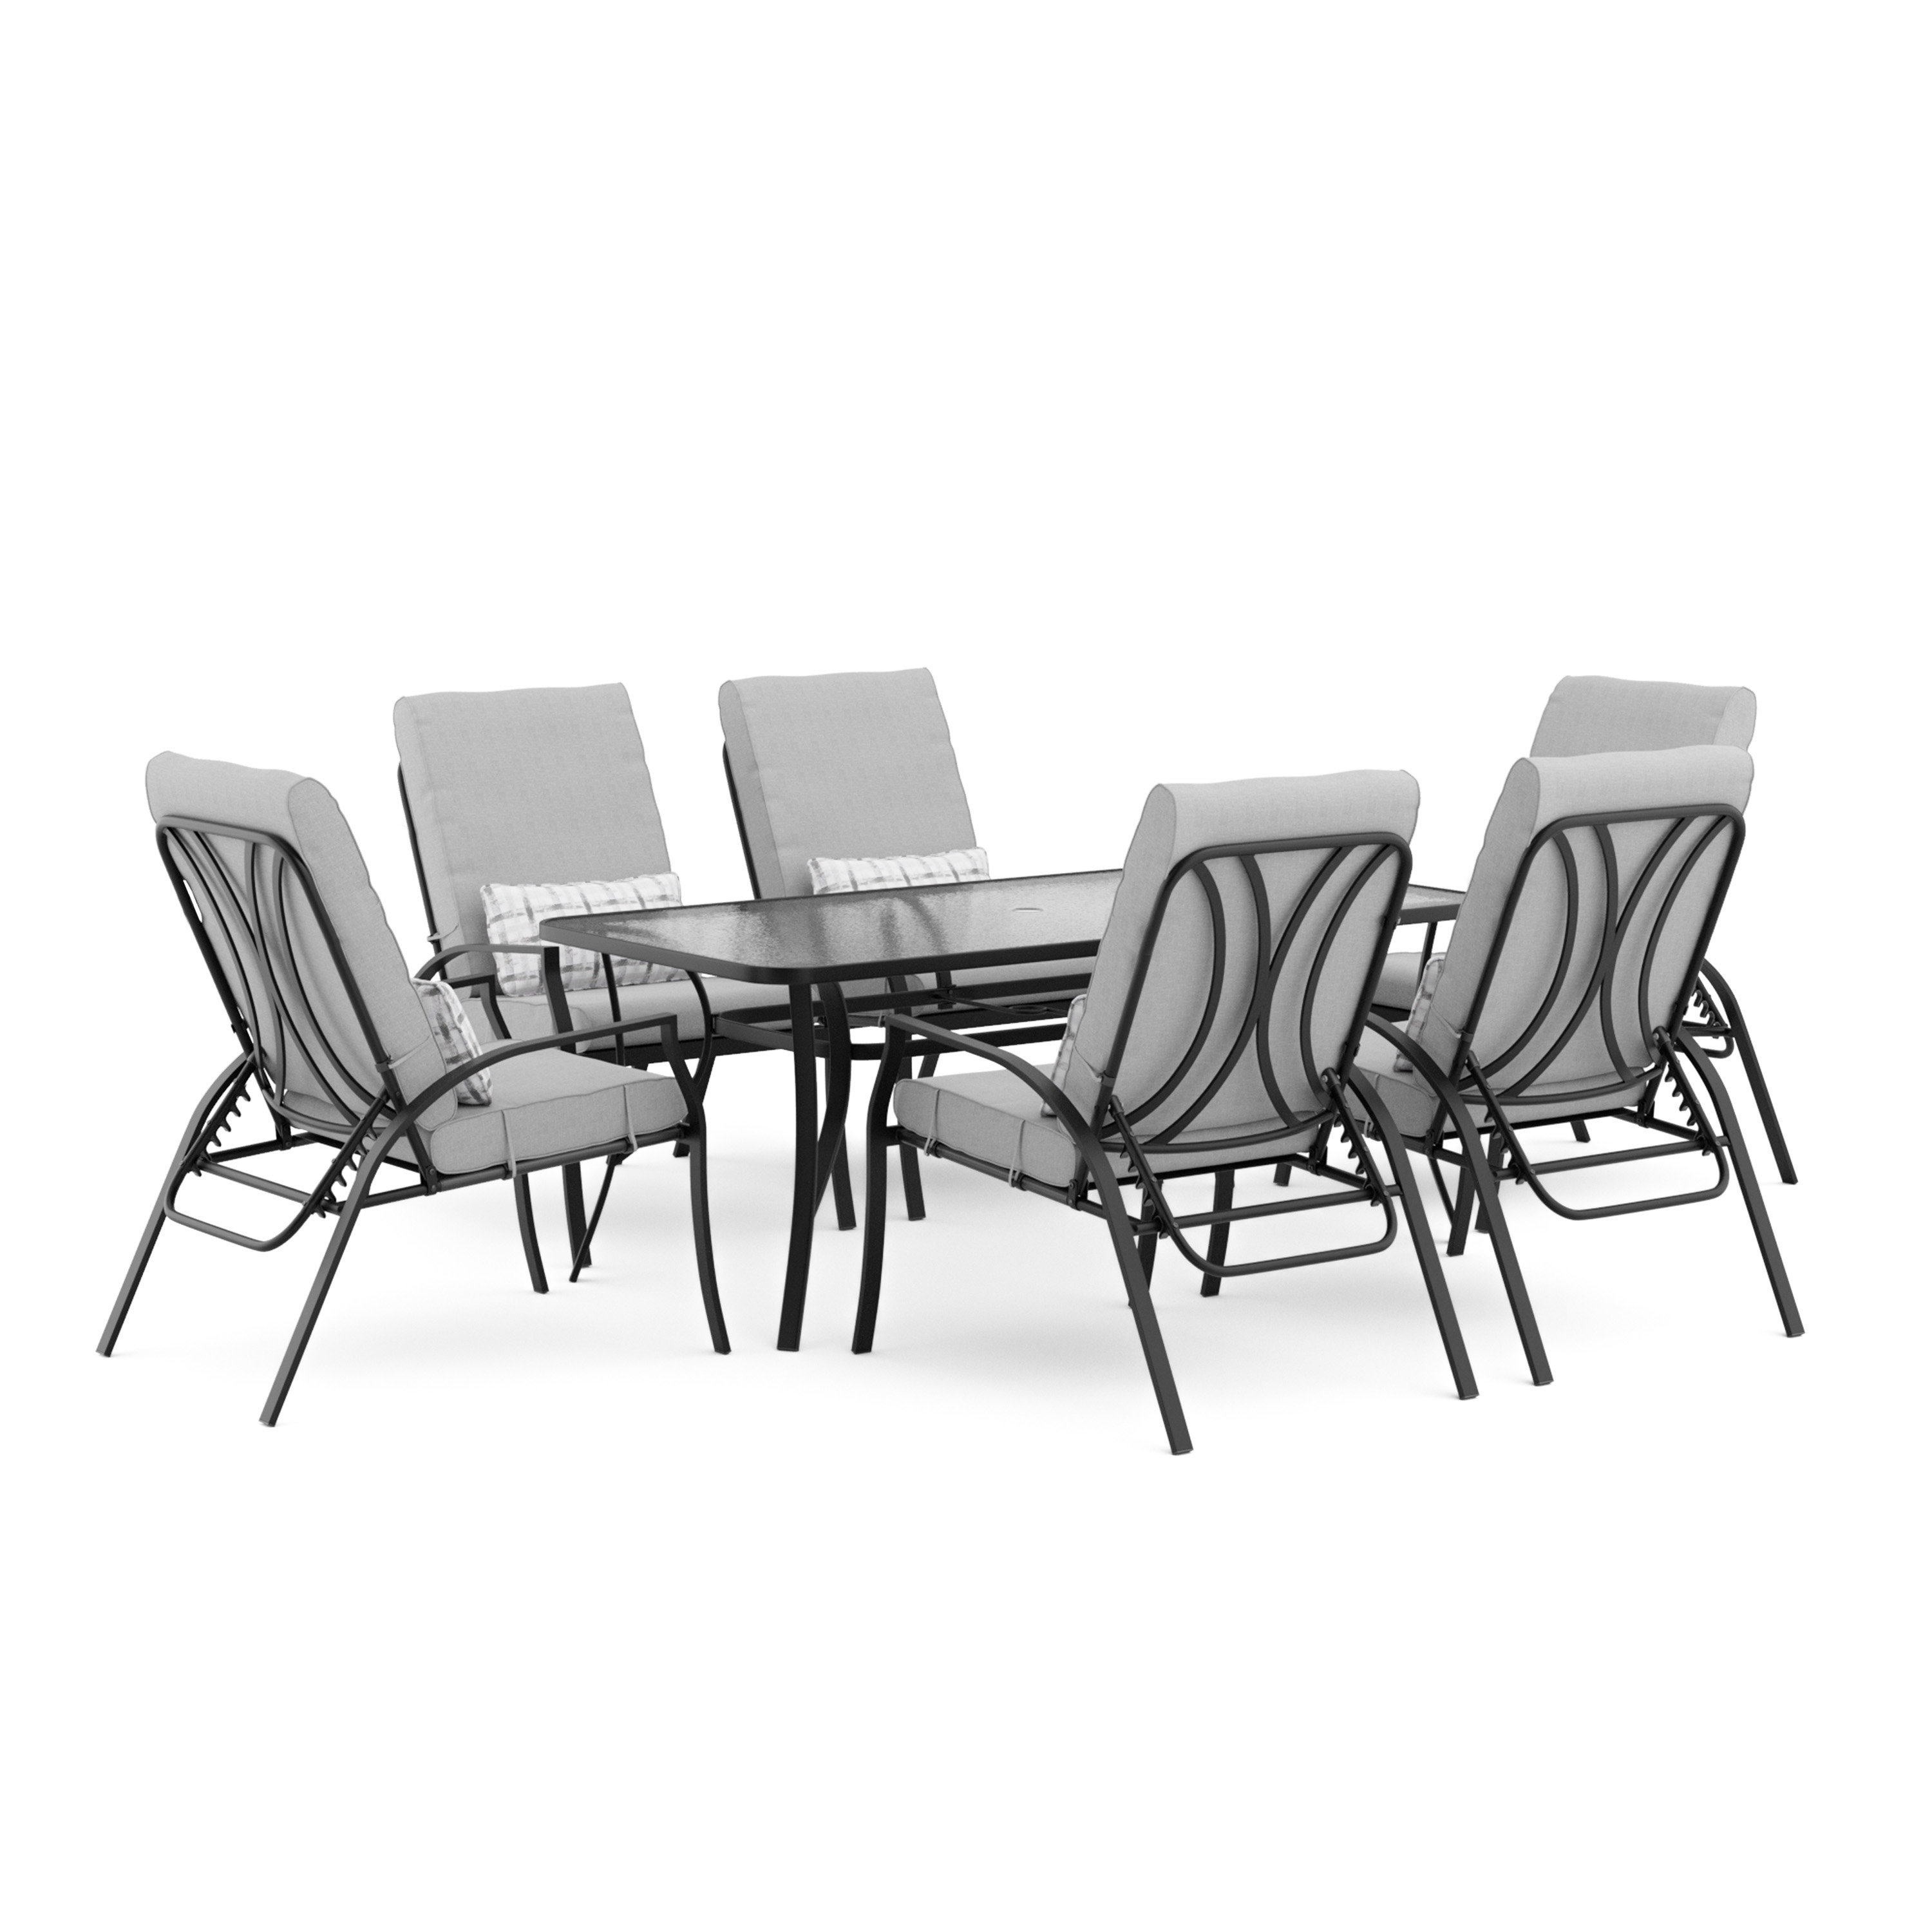 Rectangular Dining | Cushions - Wayfair with Person 6 Outdoor Tunning Set greemotion